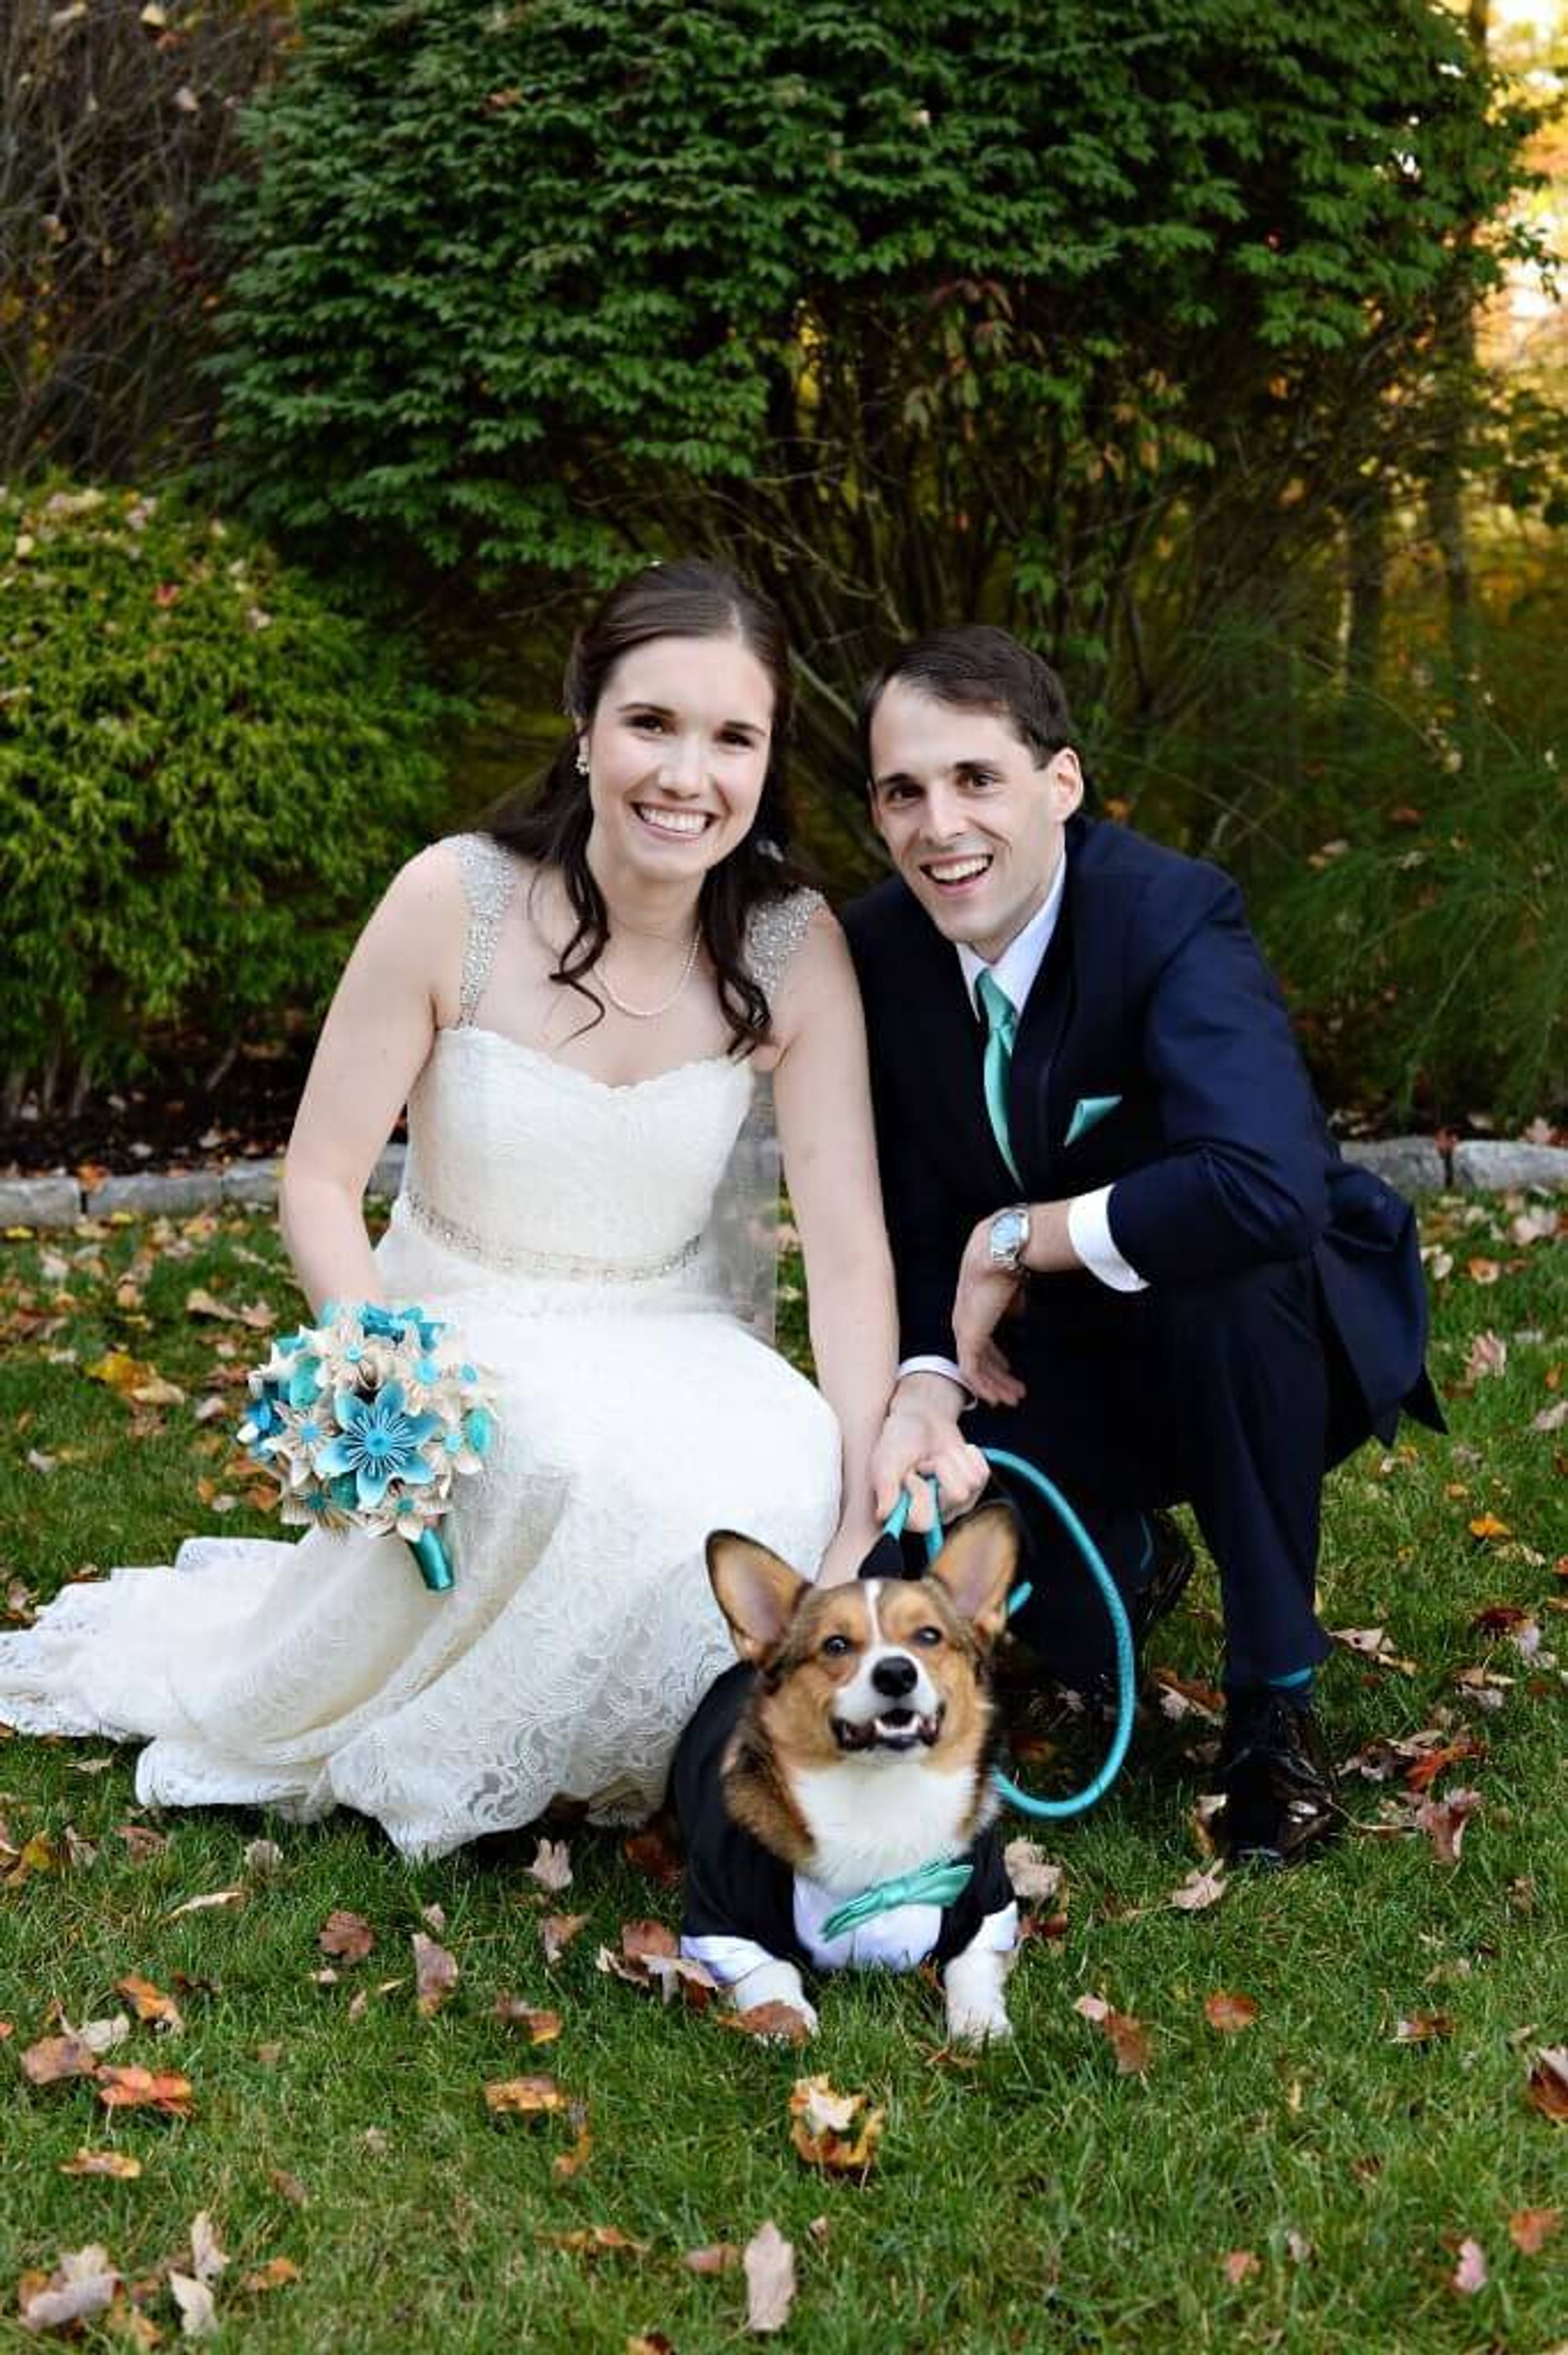 Chrisanne Grise poses with her husband and her dog during her Oct. 2016 wedding. Dog of Honor pbs rewire